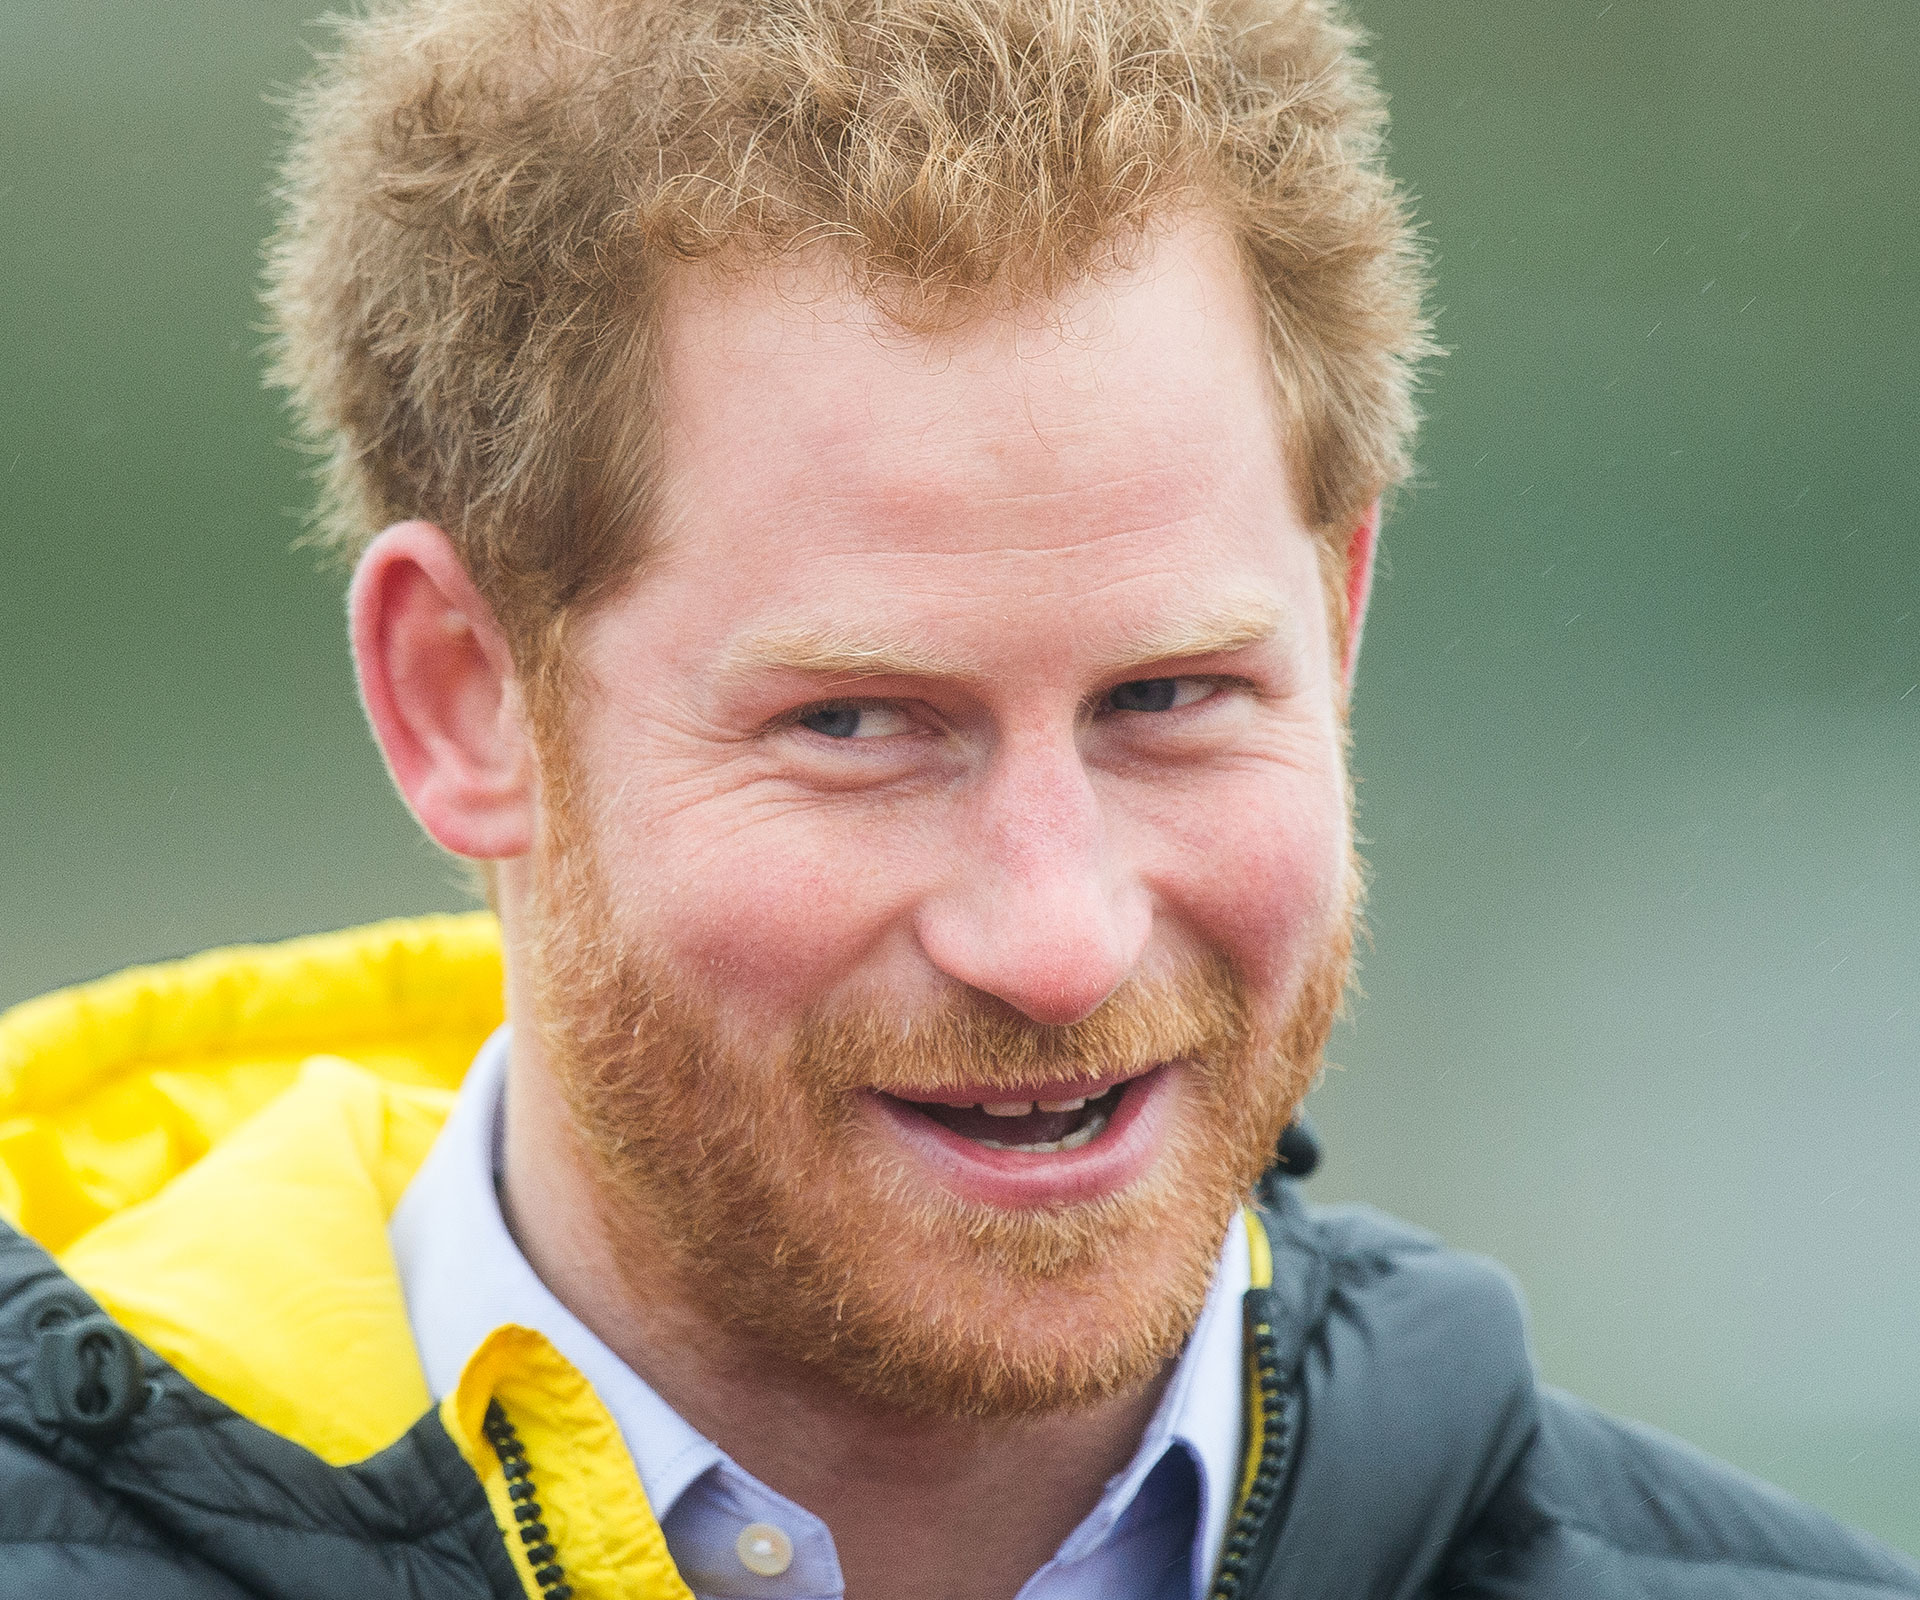 Prince Harry to the rescue!